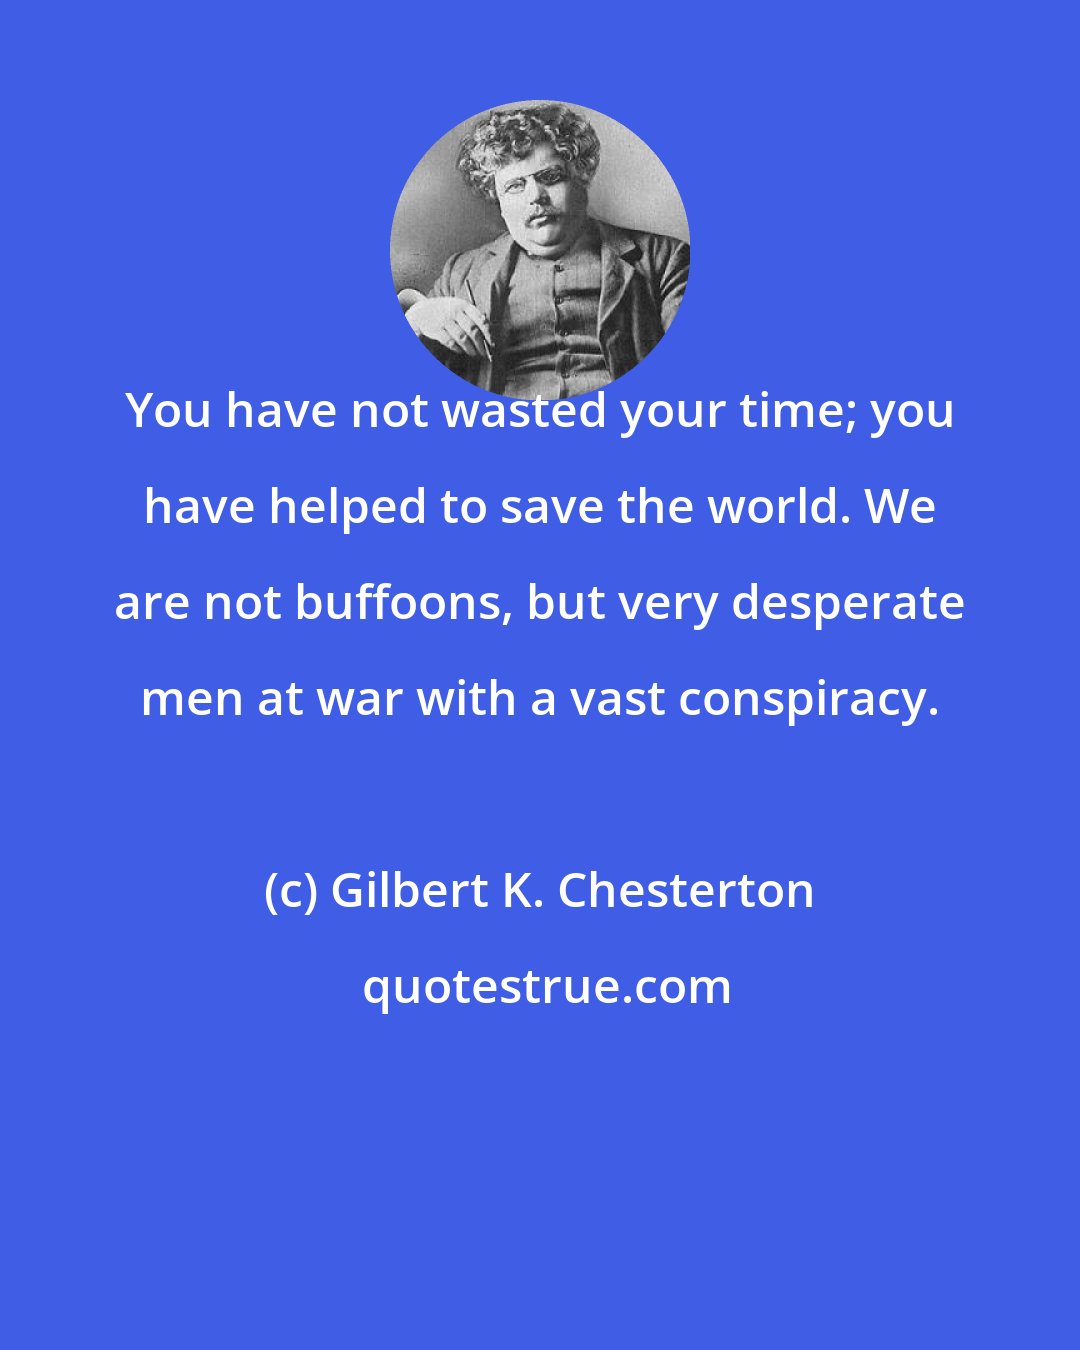 Gilbert K. Chesterton: You have not wasted your time; you have helped to save the world. We are not buffoons, but very desperate men at war with a vast conspiracy.